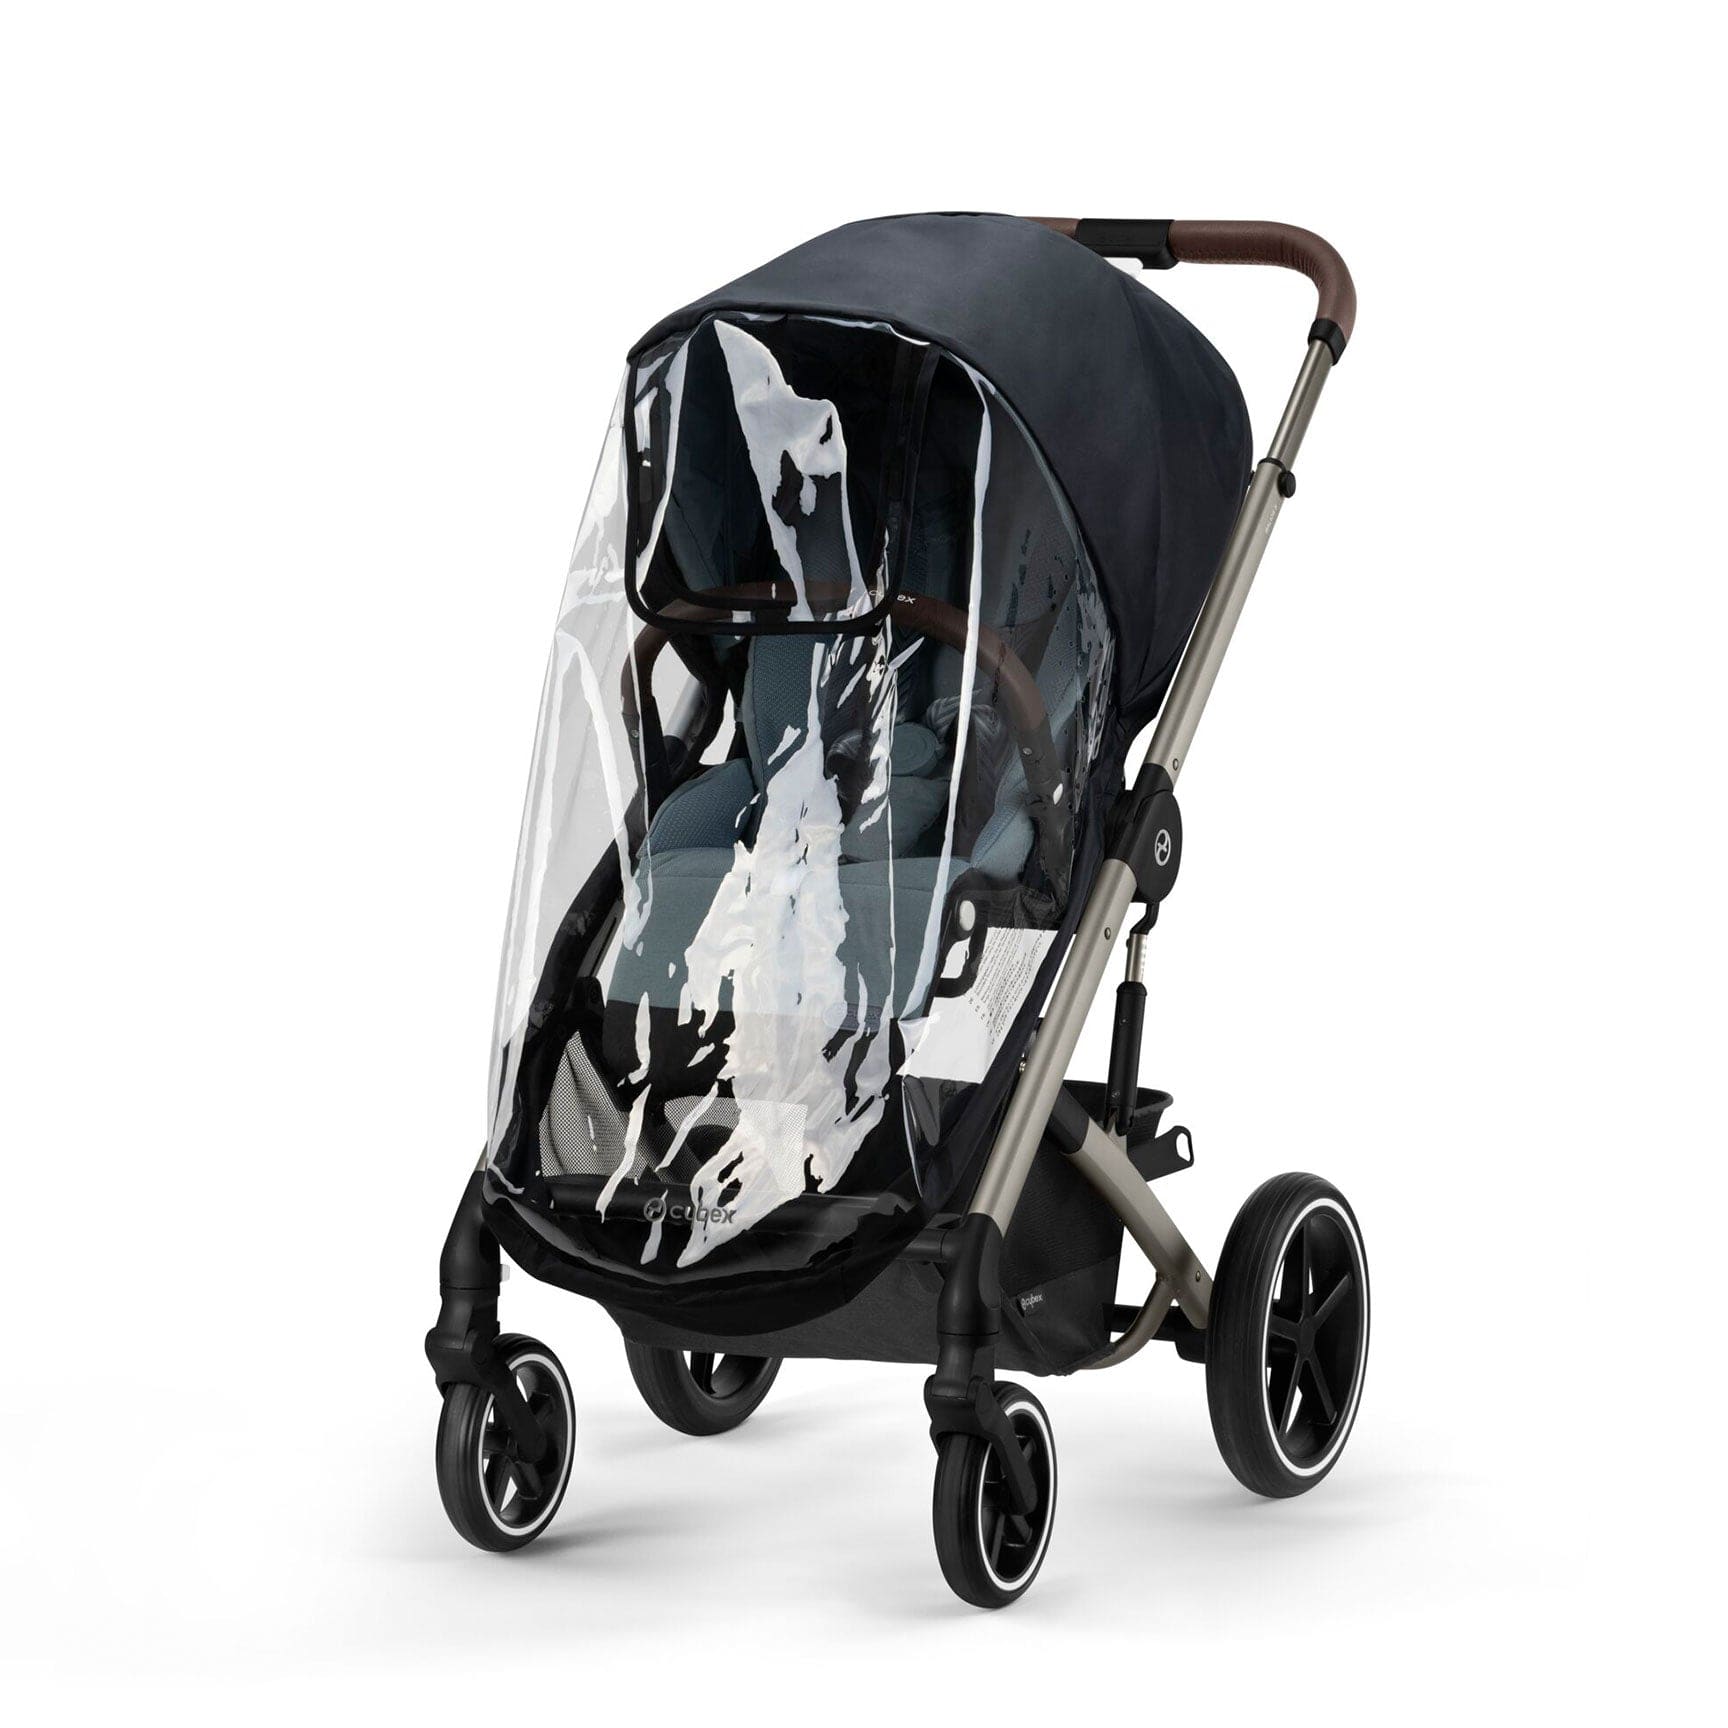 Cybex Balios Comfort Bundle in Silver/Lava Grey Travel Systems 127456-SLV-LAV-GRY 4063846317967